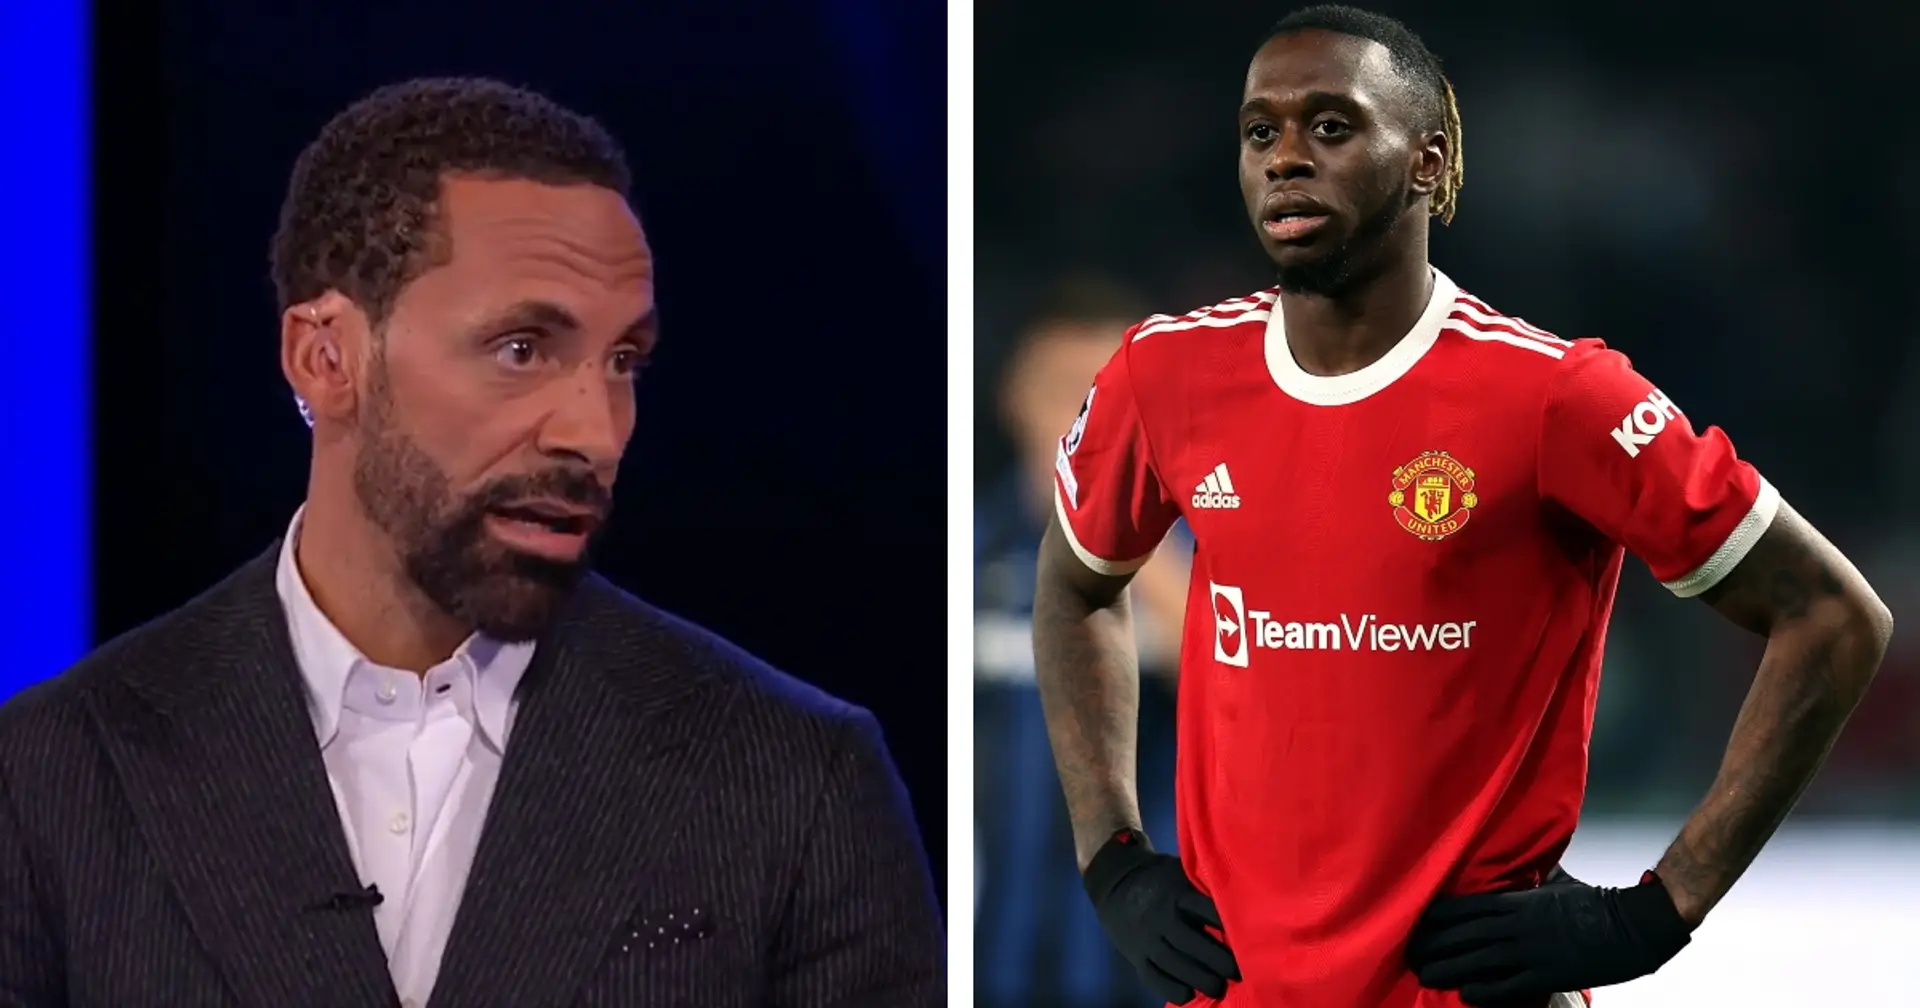 'He needs to work on his game': Ferdinand believes Wan-Bissaka could lose starting XI place under Rangnick